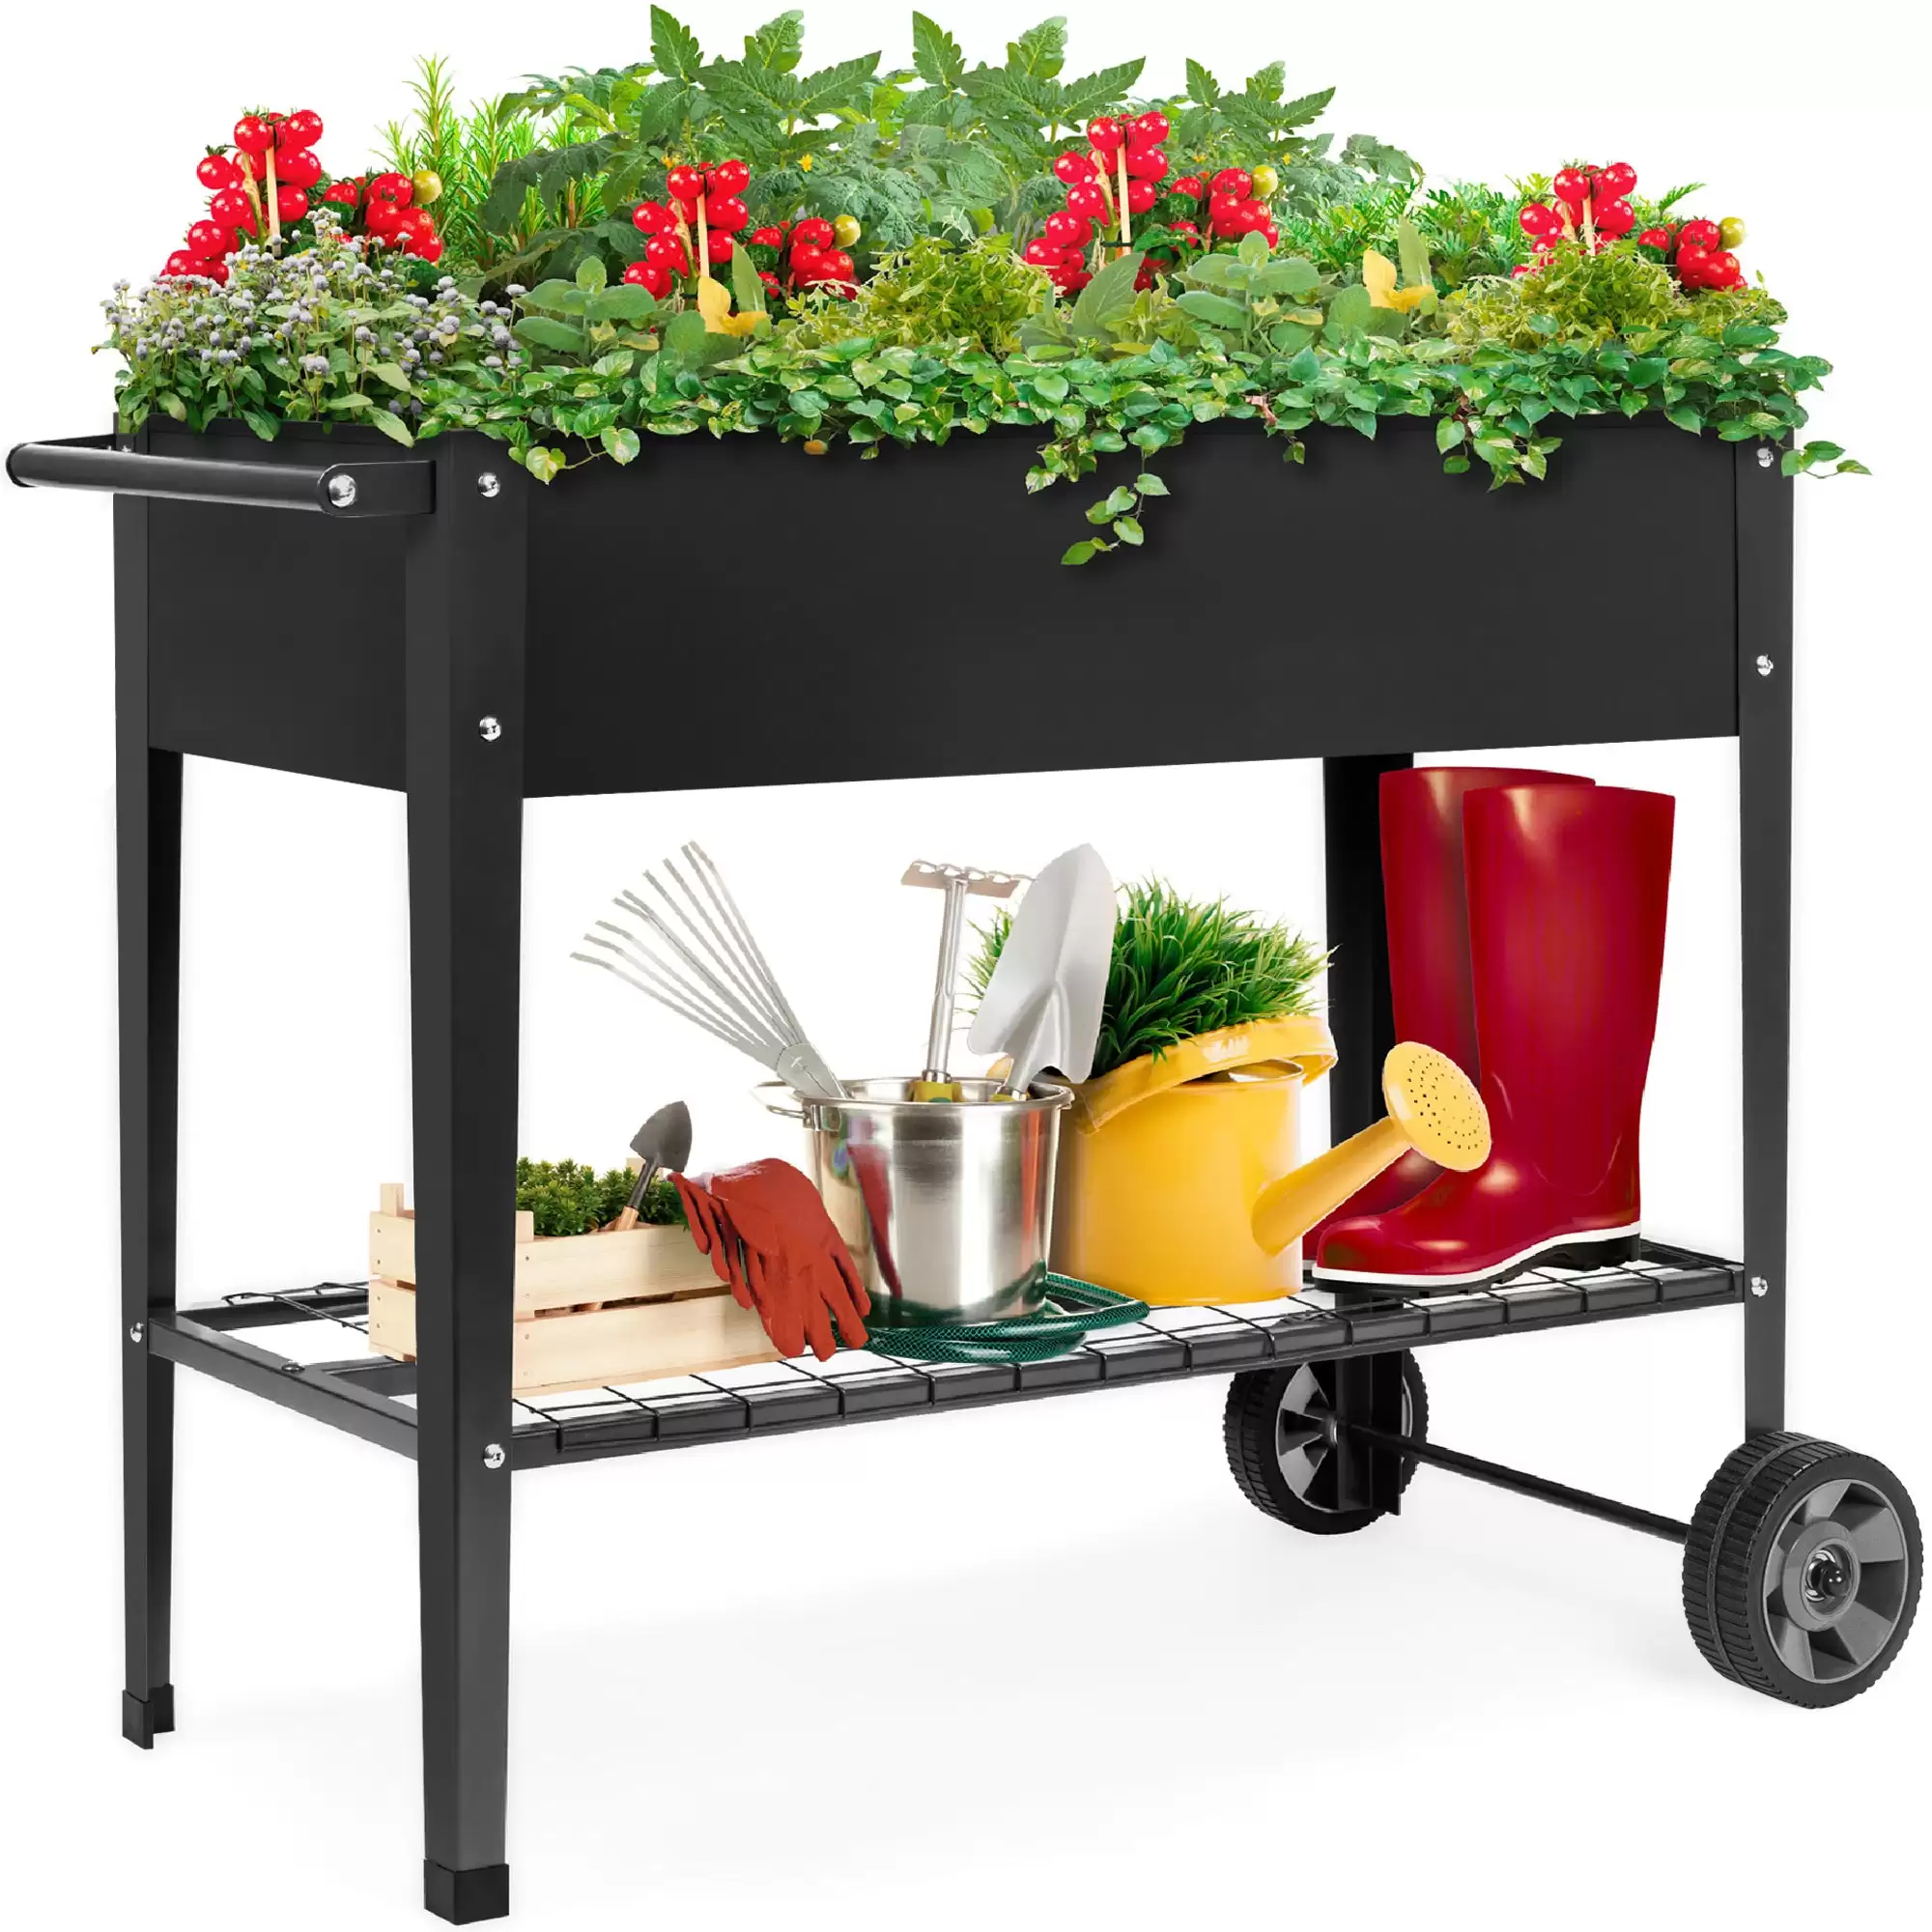 Spend $59.99 Elevated Metal Garden Bed For Backyard W/ Wheels, Shelf With This Bestchoiceproducts Discount Voucher